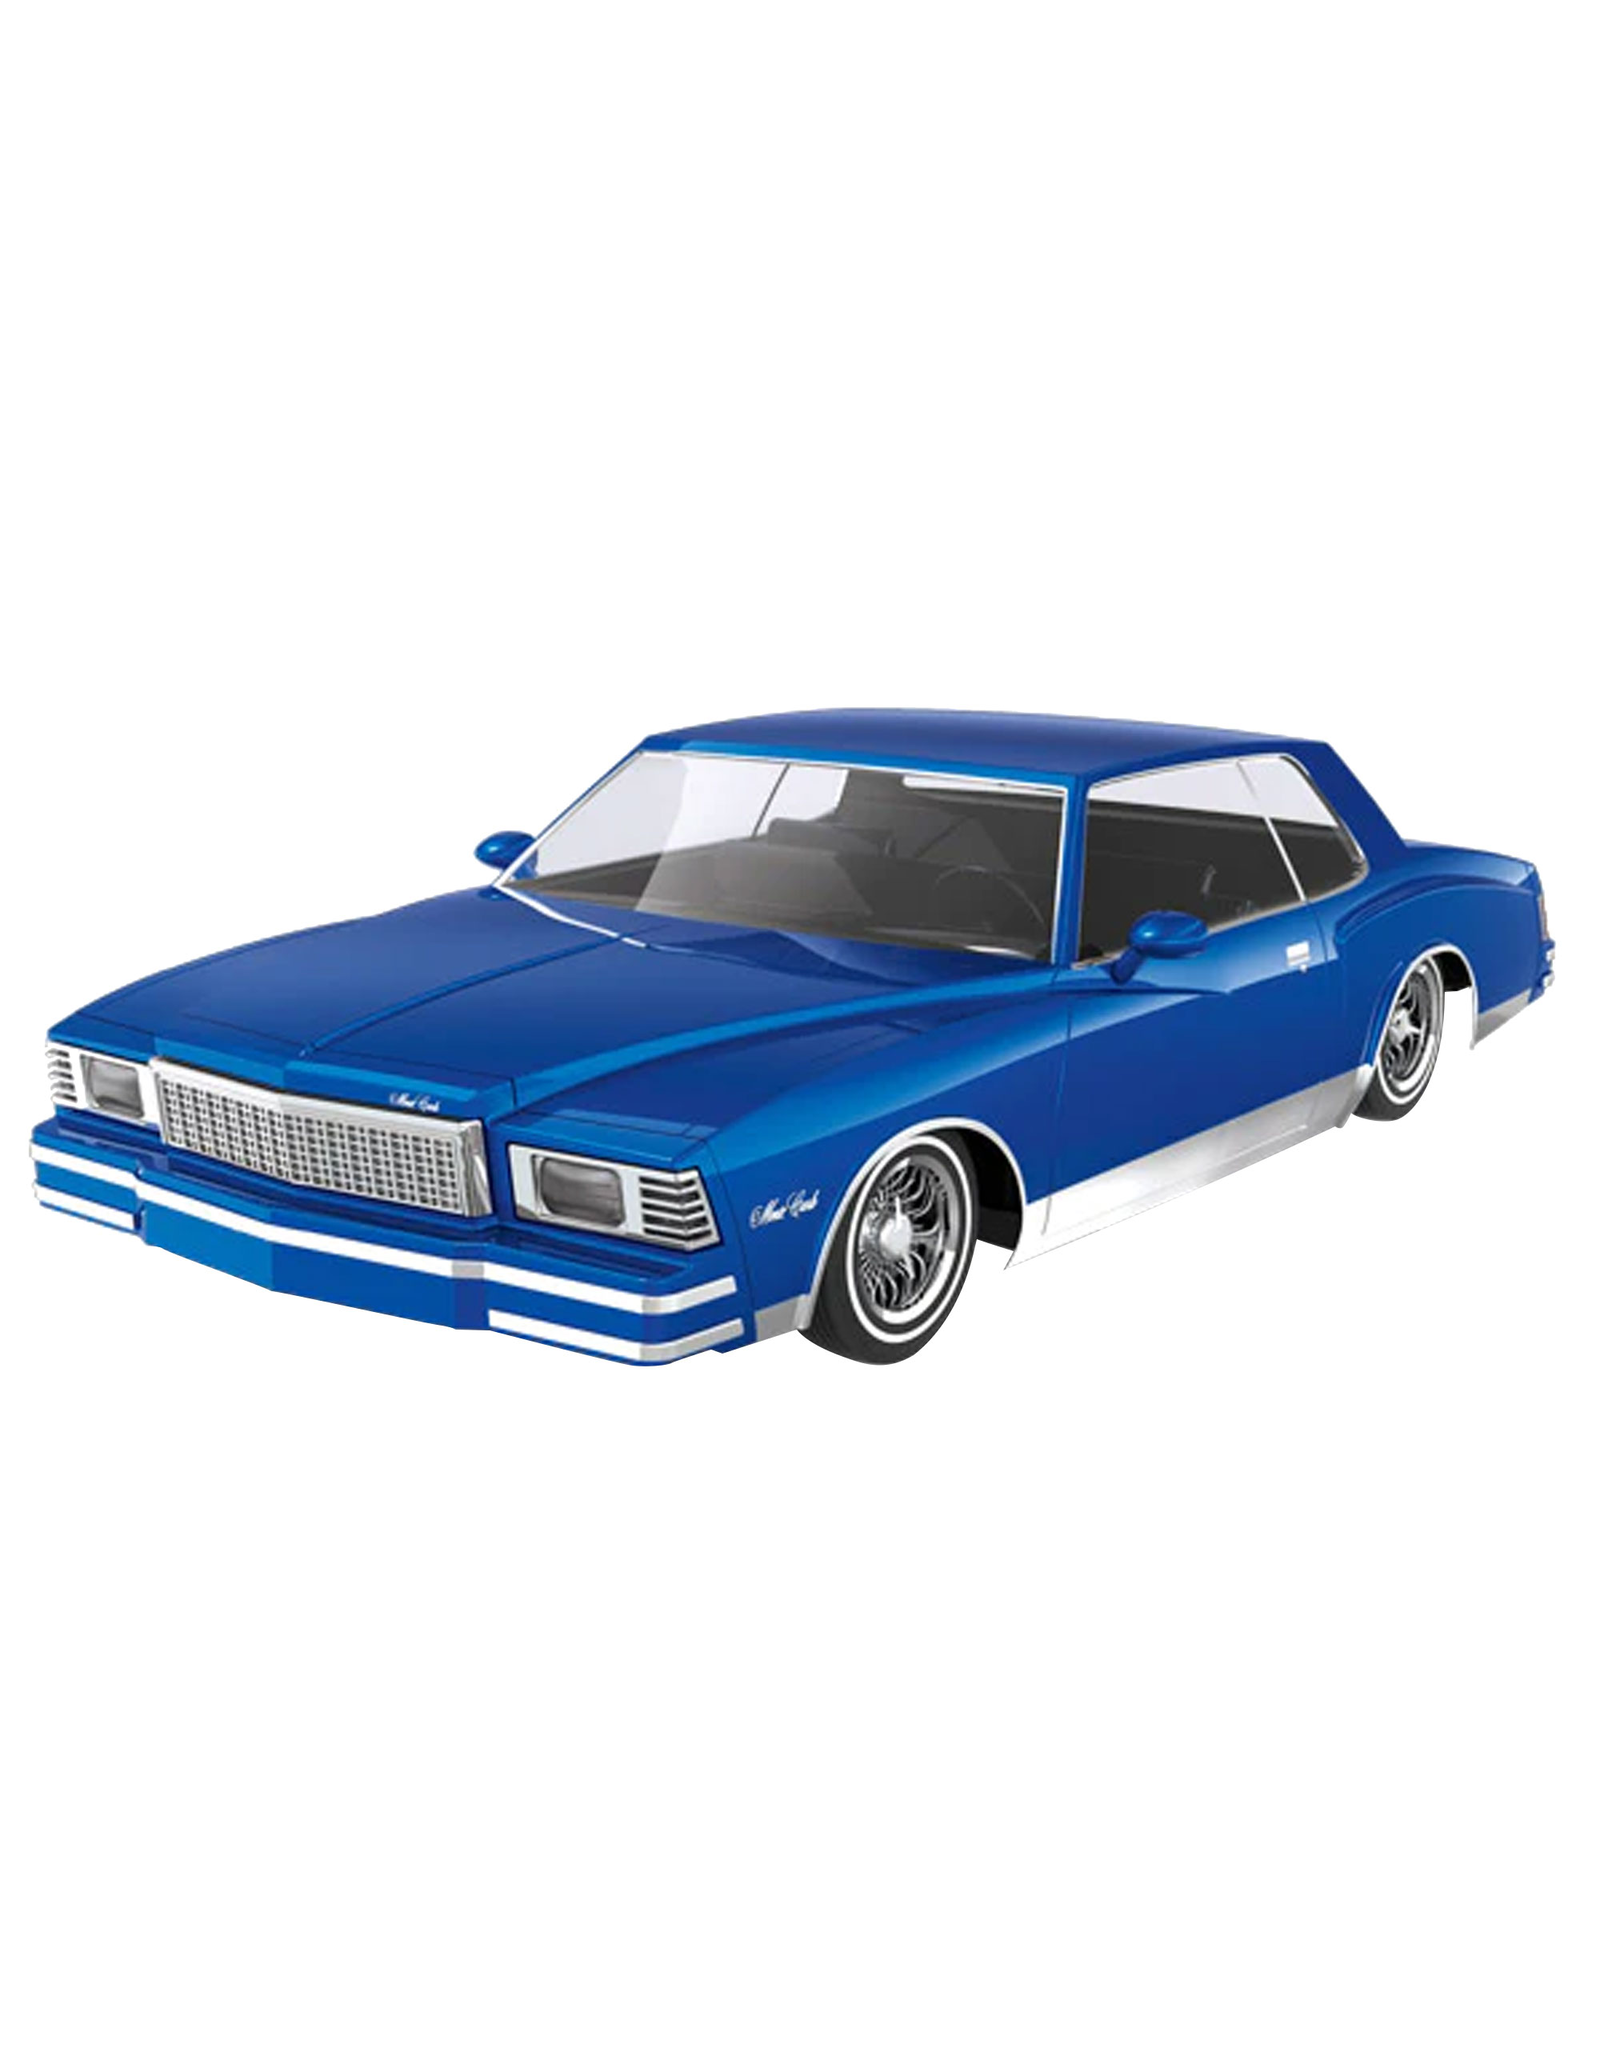 Redcat Racing 1/10 1979 Chevrolet Monte Carlo Brushed 2WD Lowrider RTR, Blue